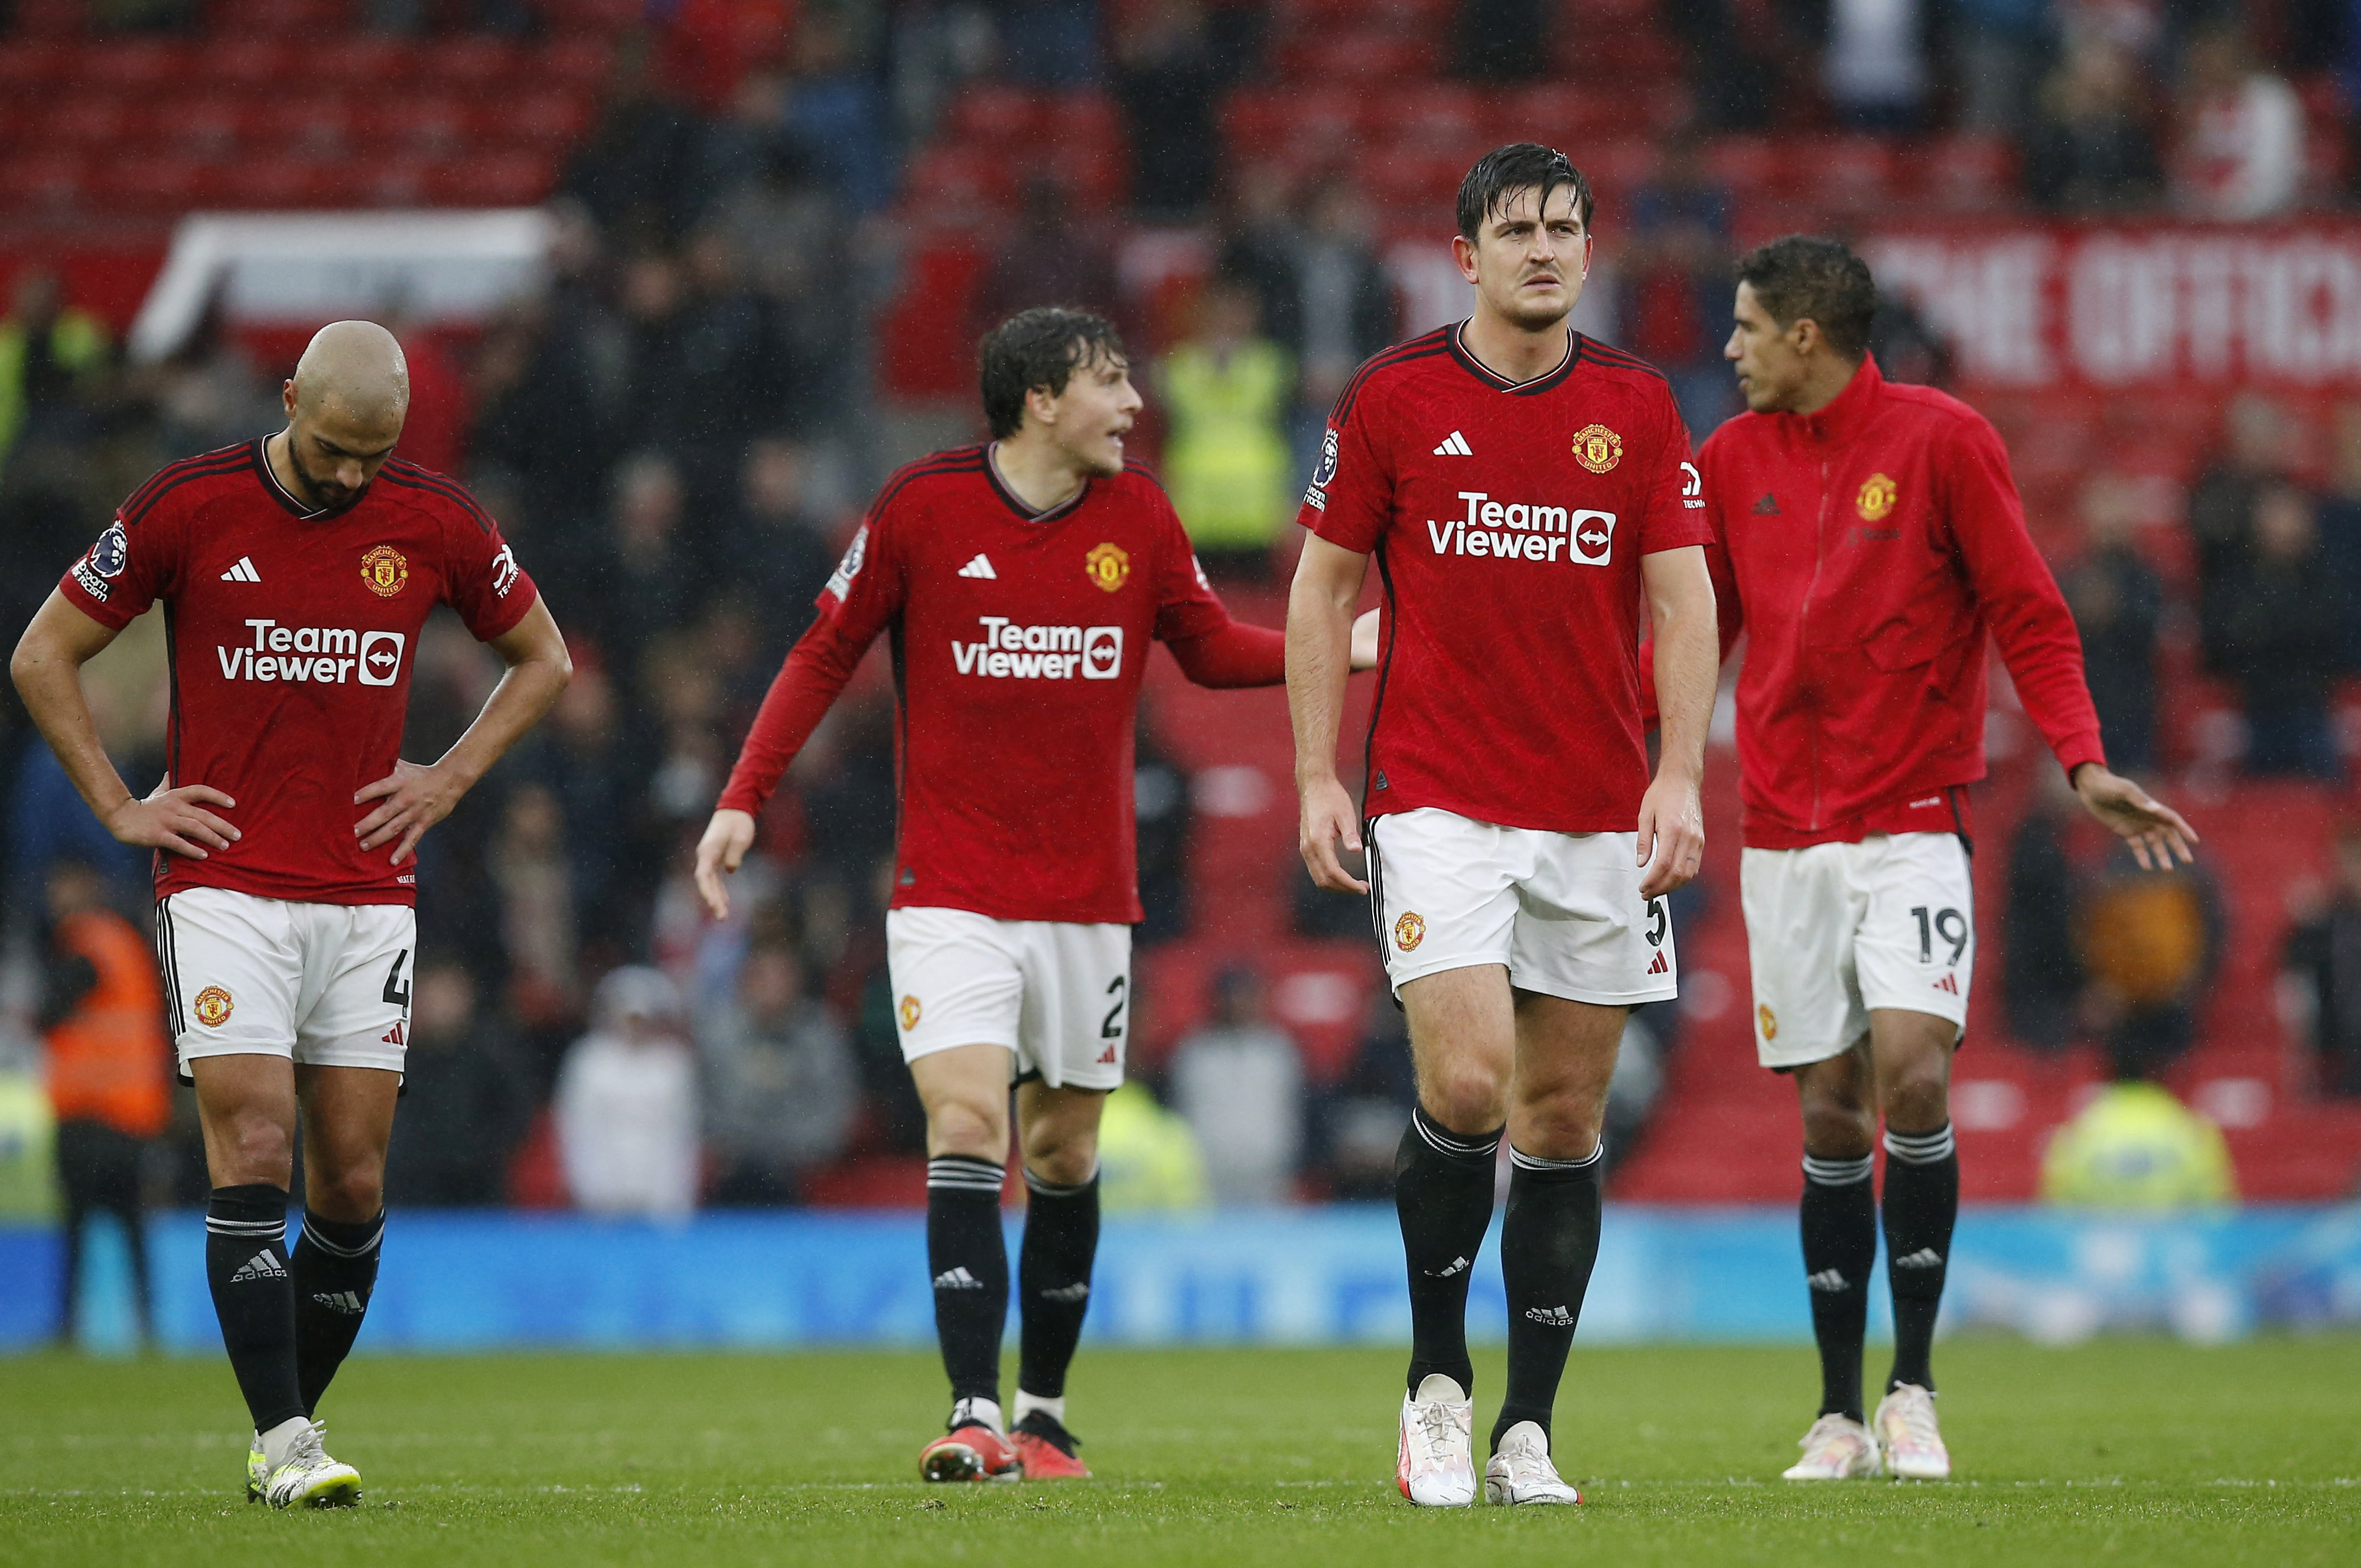 Man United frustrates Liverpool as Arsenal moves back on top of the Premier  League. Villa wins again